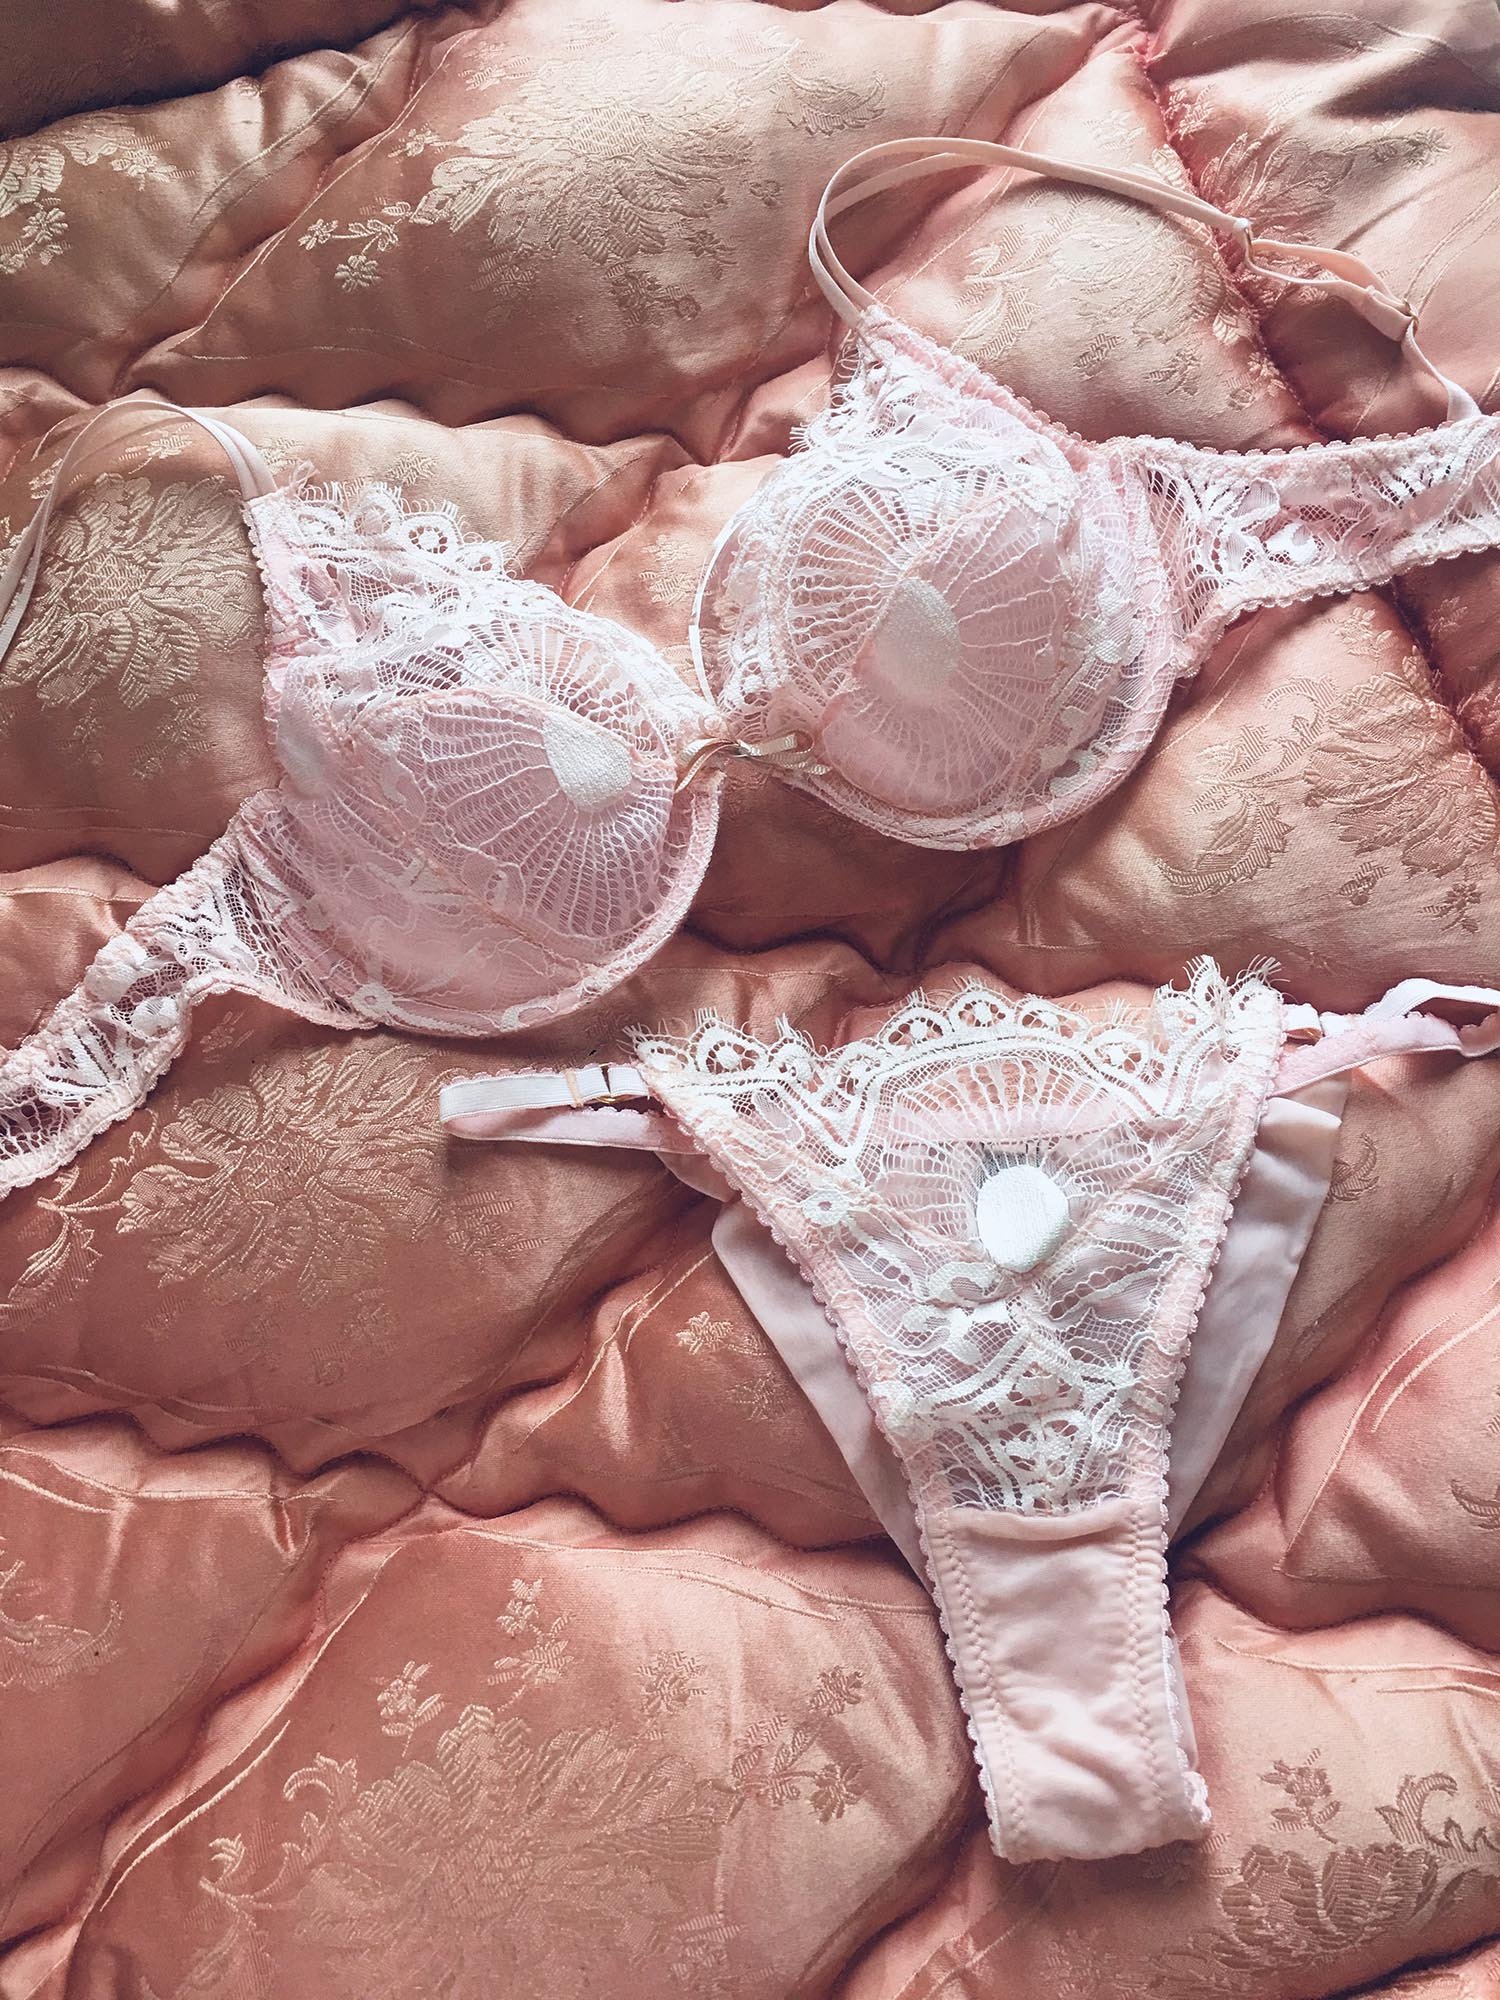 bea nunez recommends Pink Lace Panties And Bra